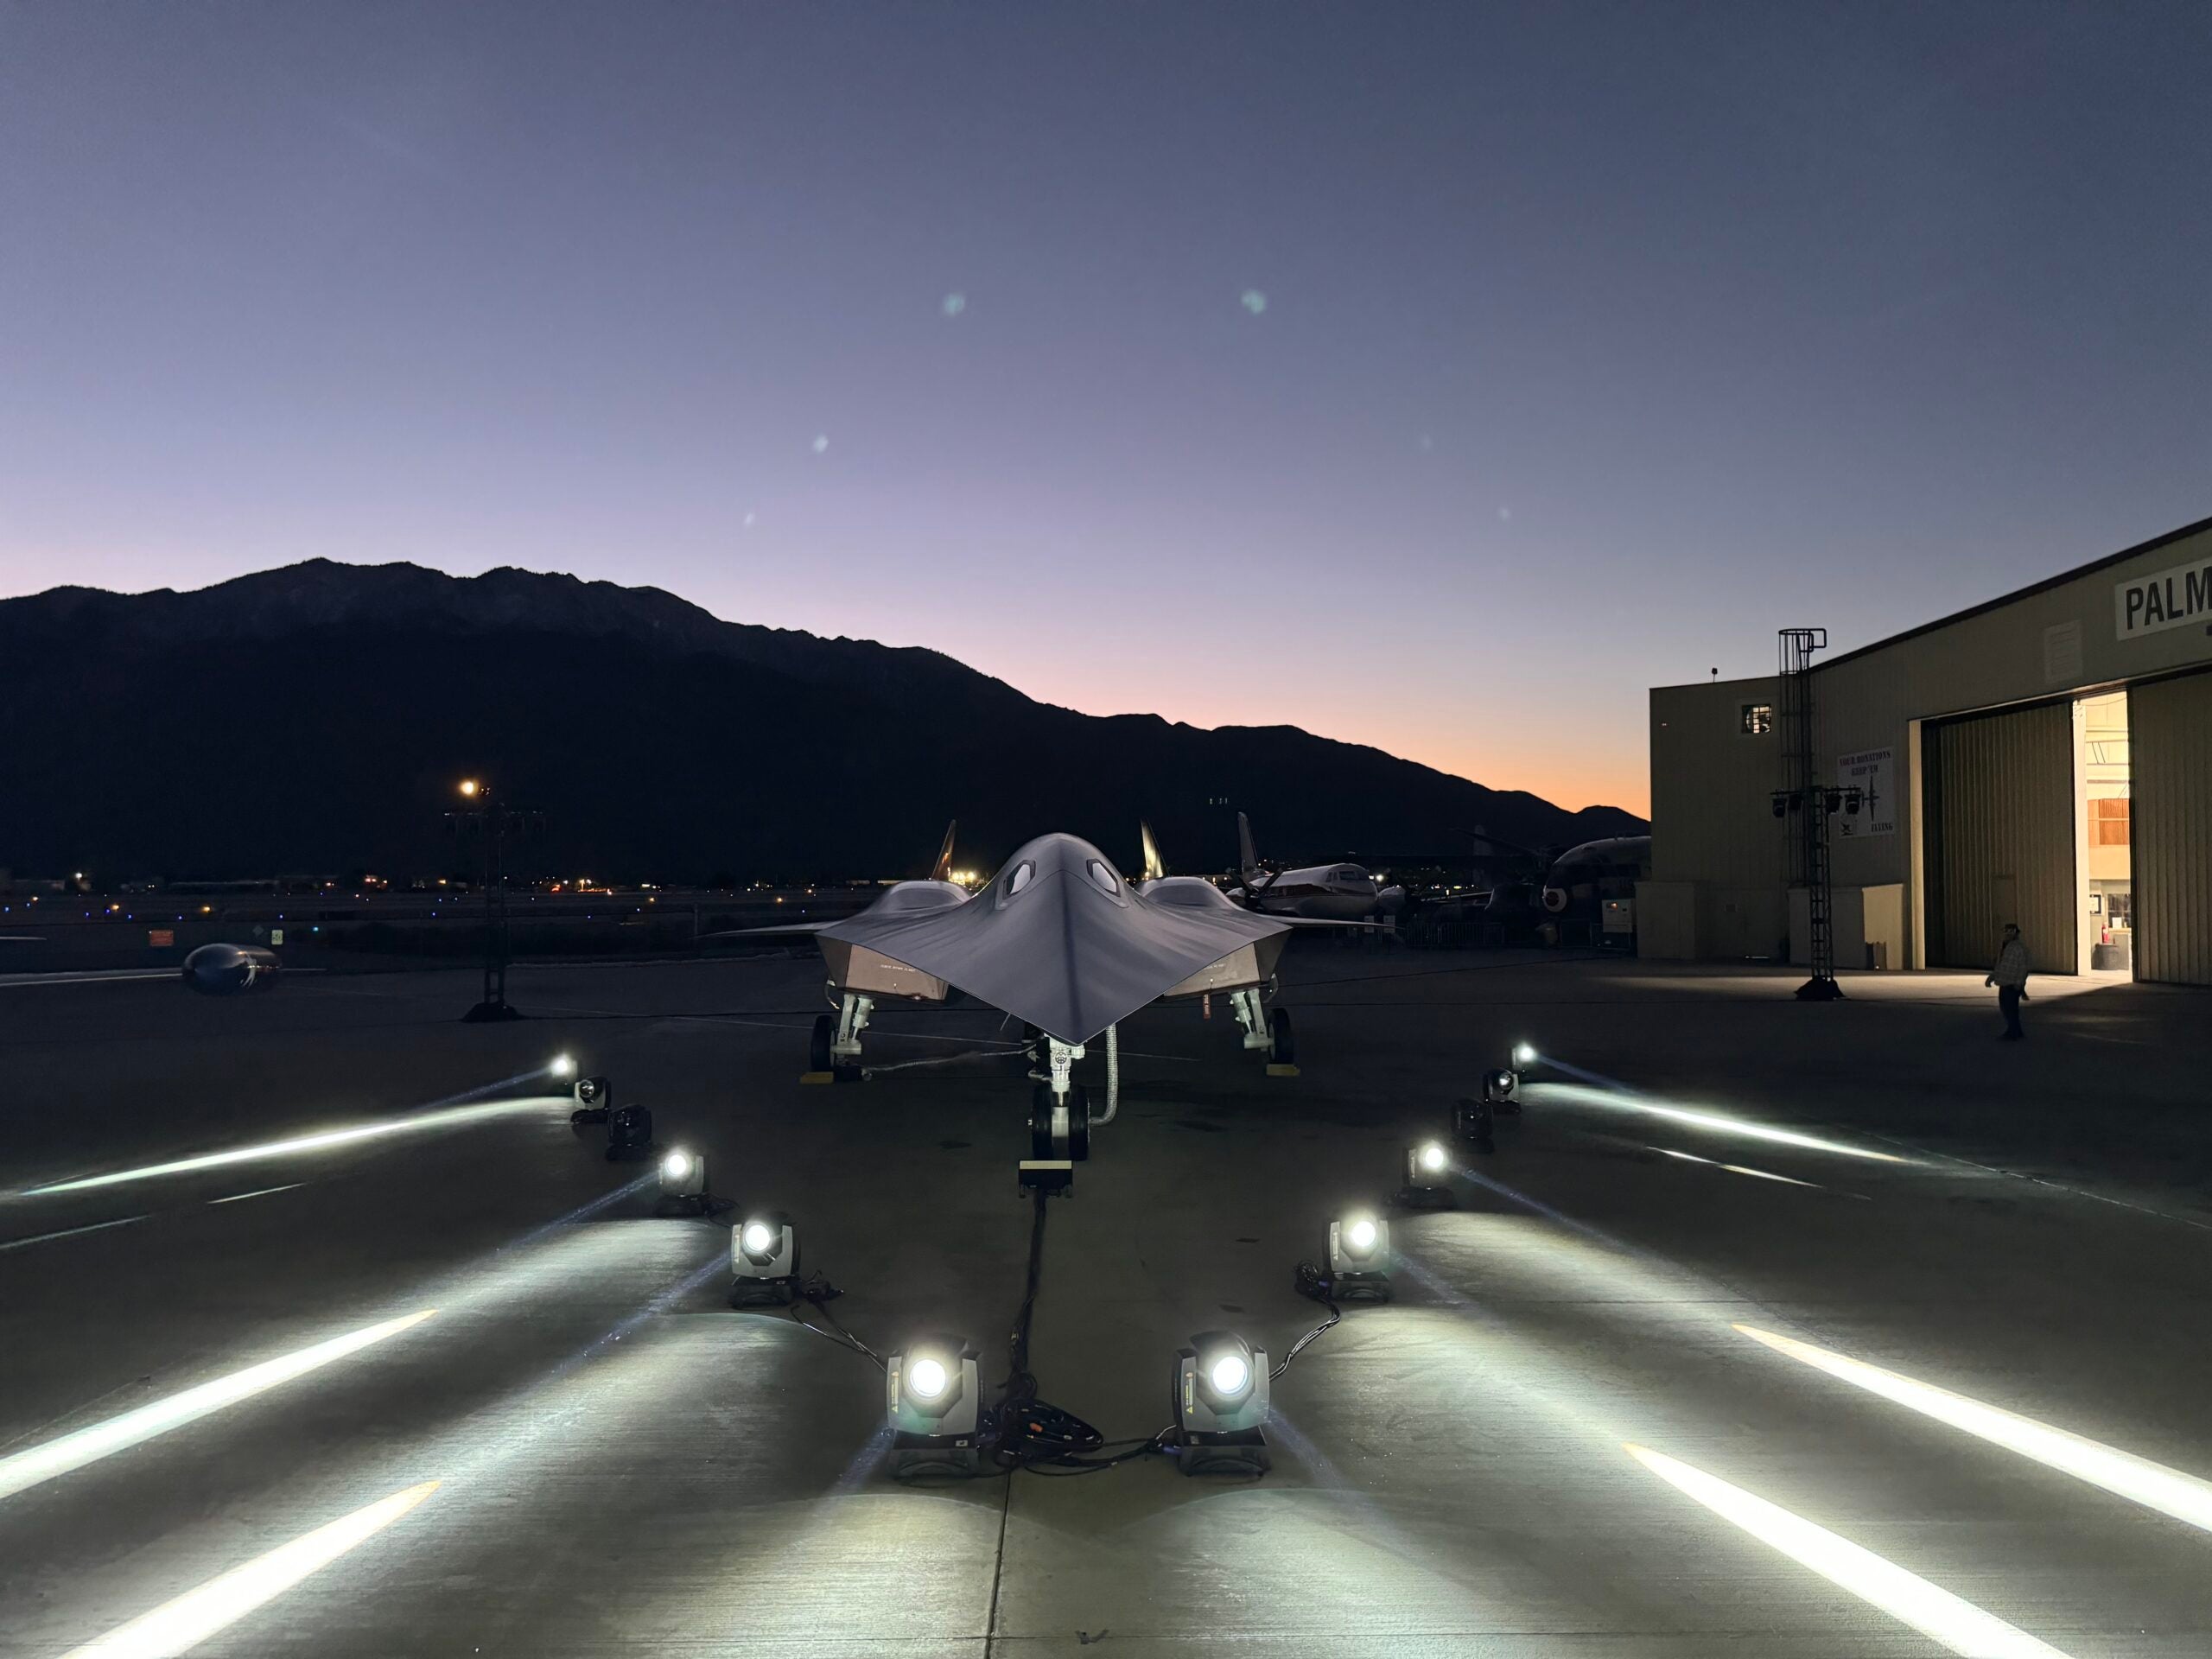 Movie Star Airplane Appears in Palm Springs Aviation Museum